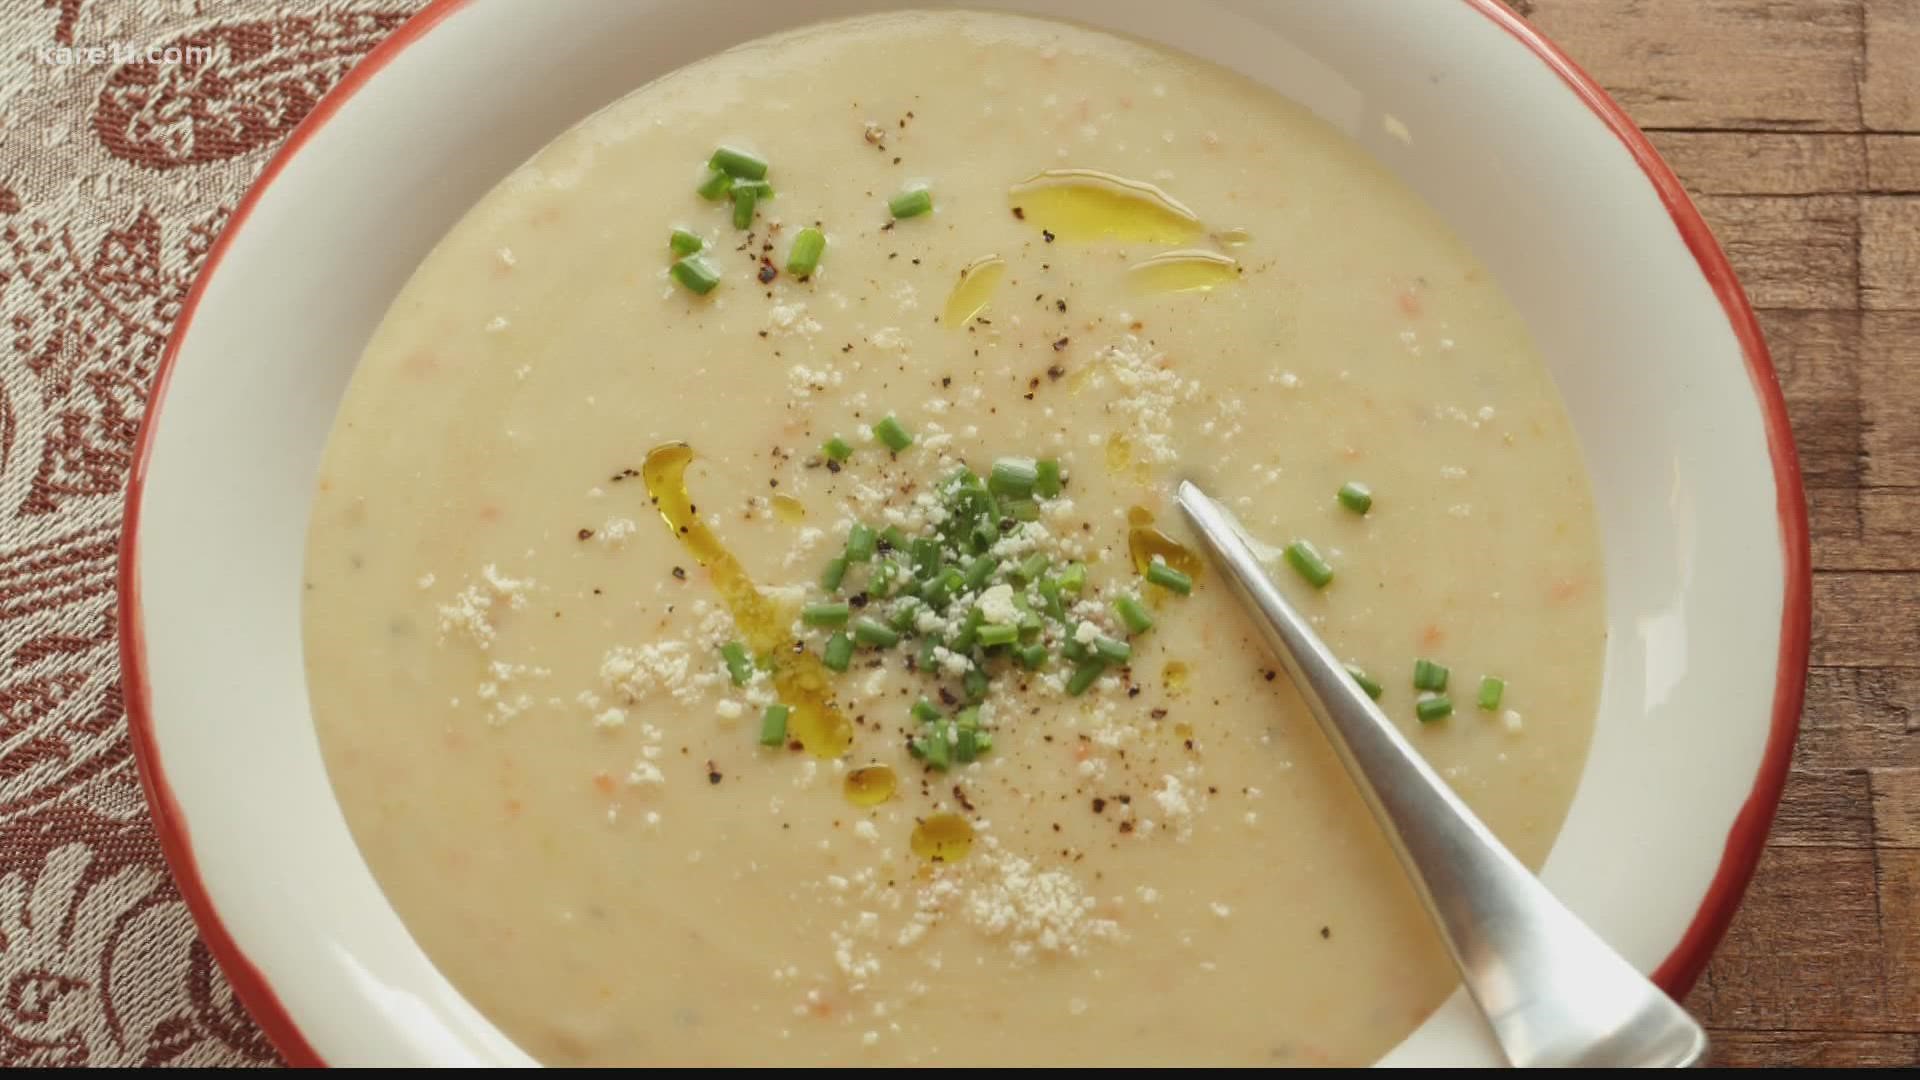 There are rarely leftover mashed potatoes on Thanksgiving, but if there are some you must try Kowalski's leftover mashed potato soup recipe from KARE in the Kitchen.